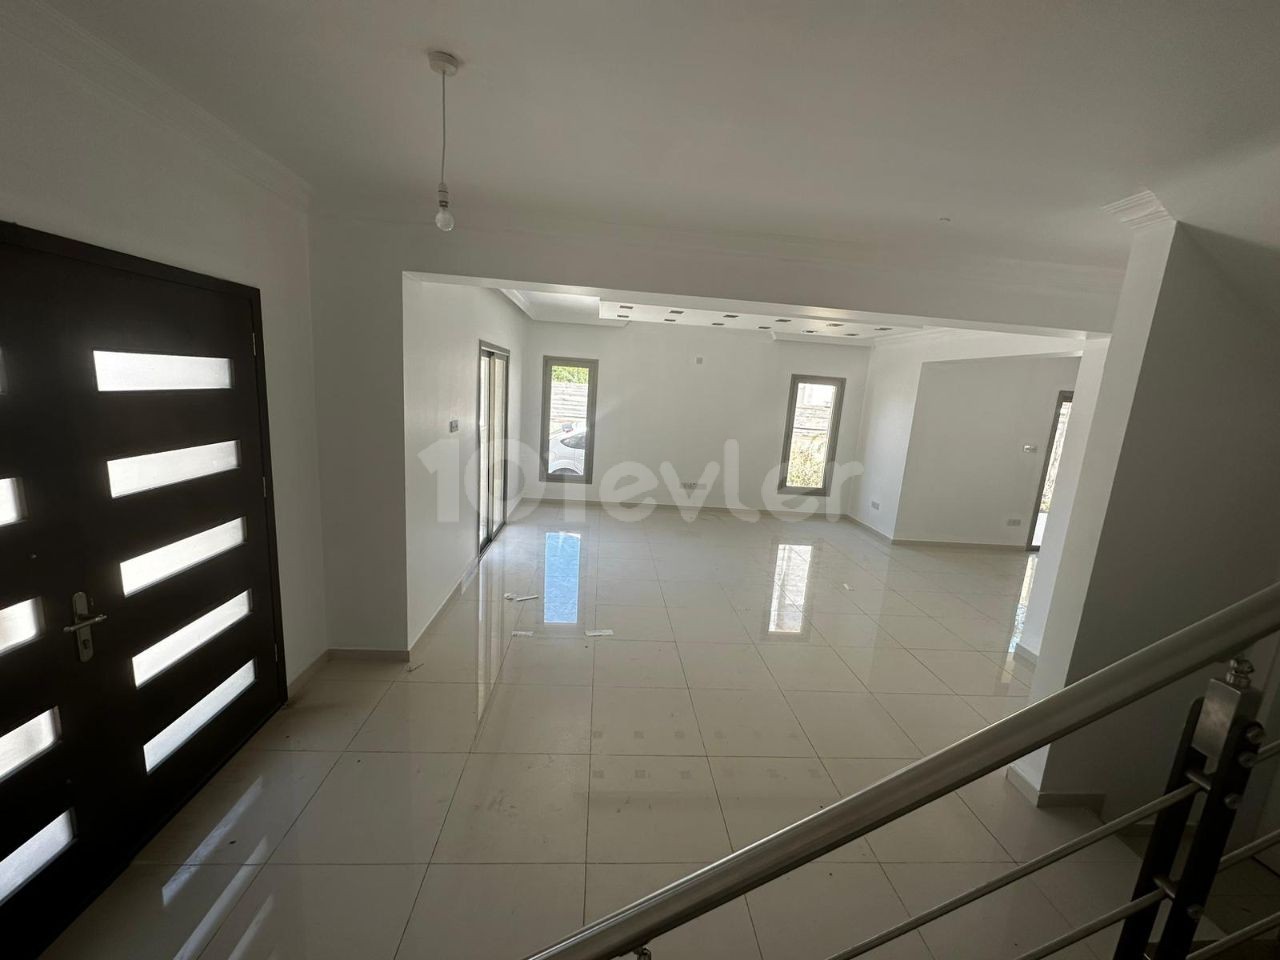 3+1 villa for sale at affordable price in Hamitköy